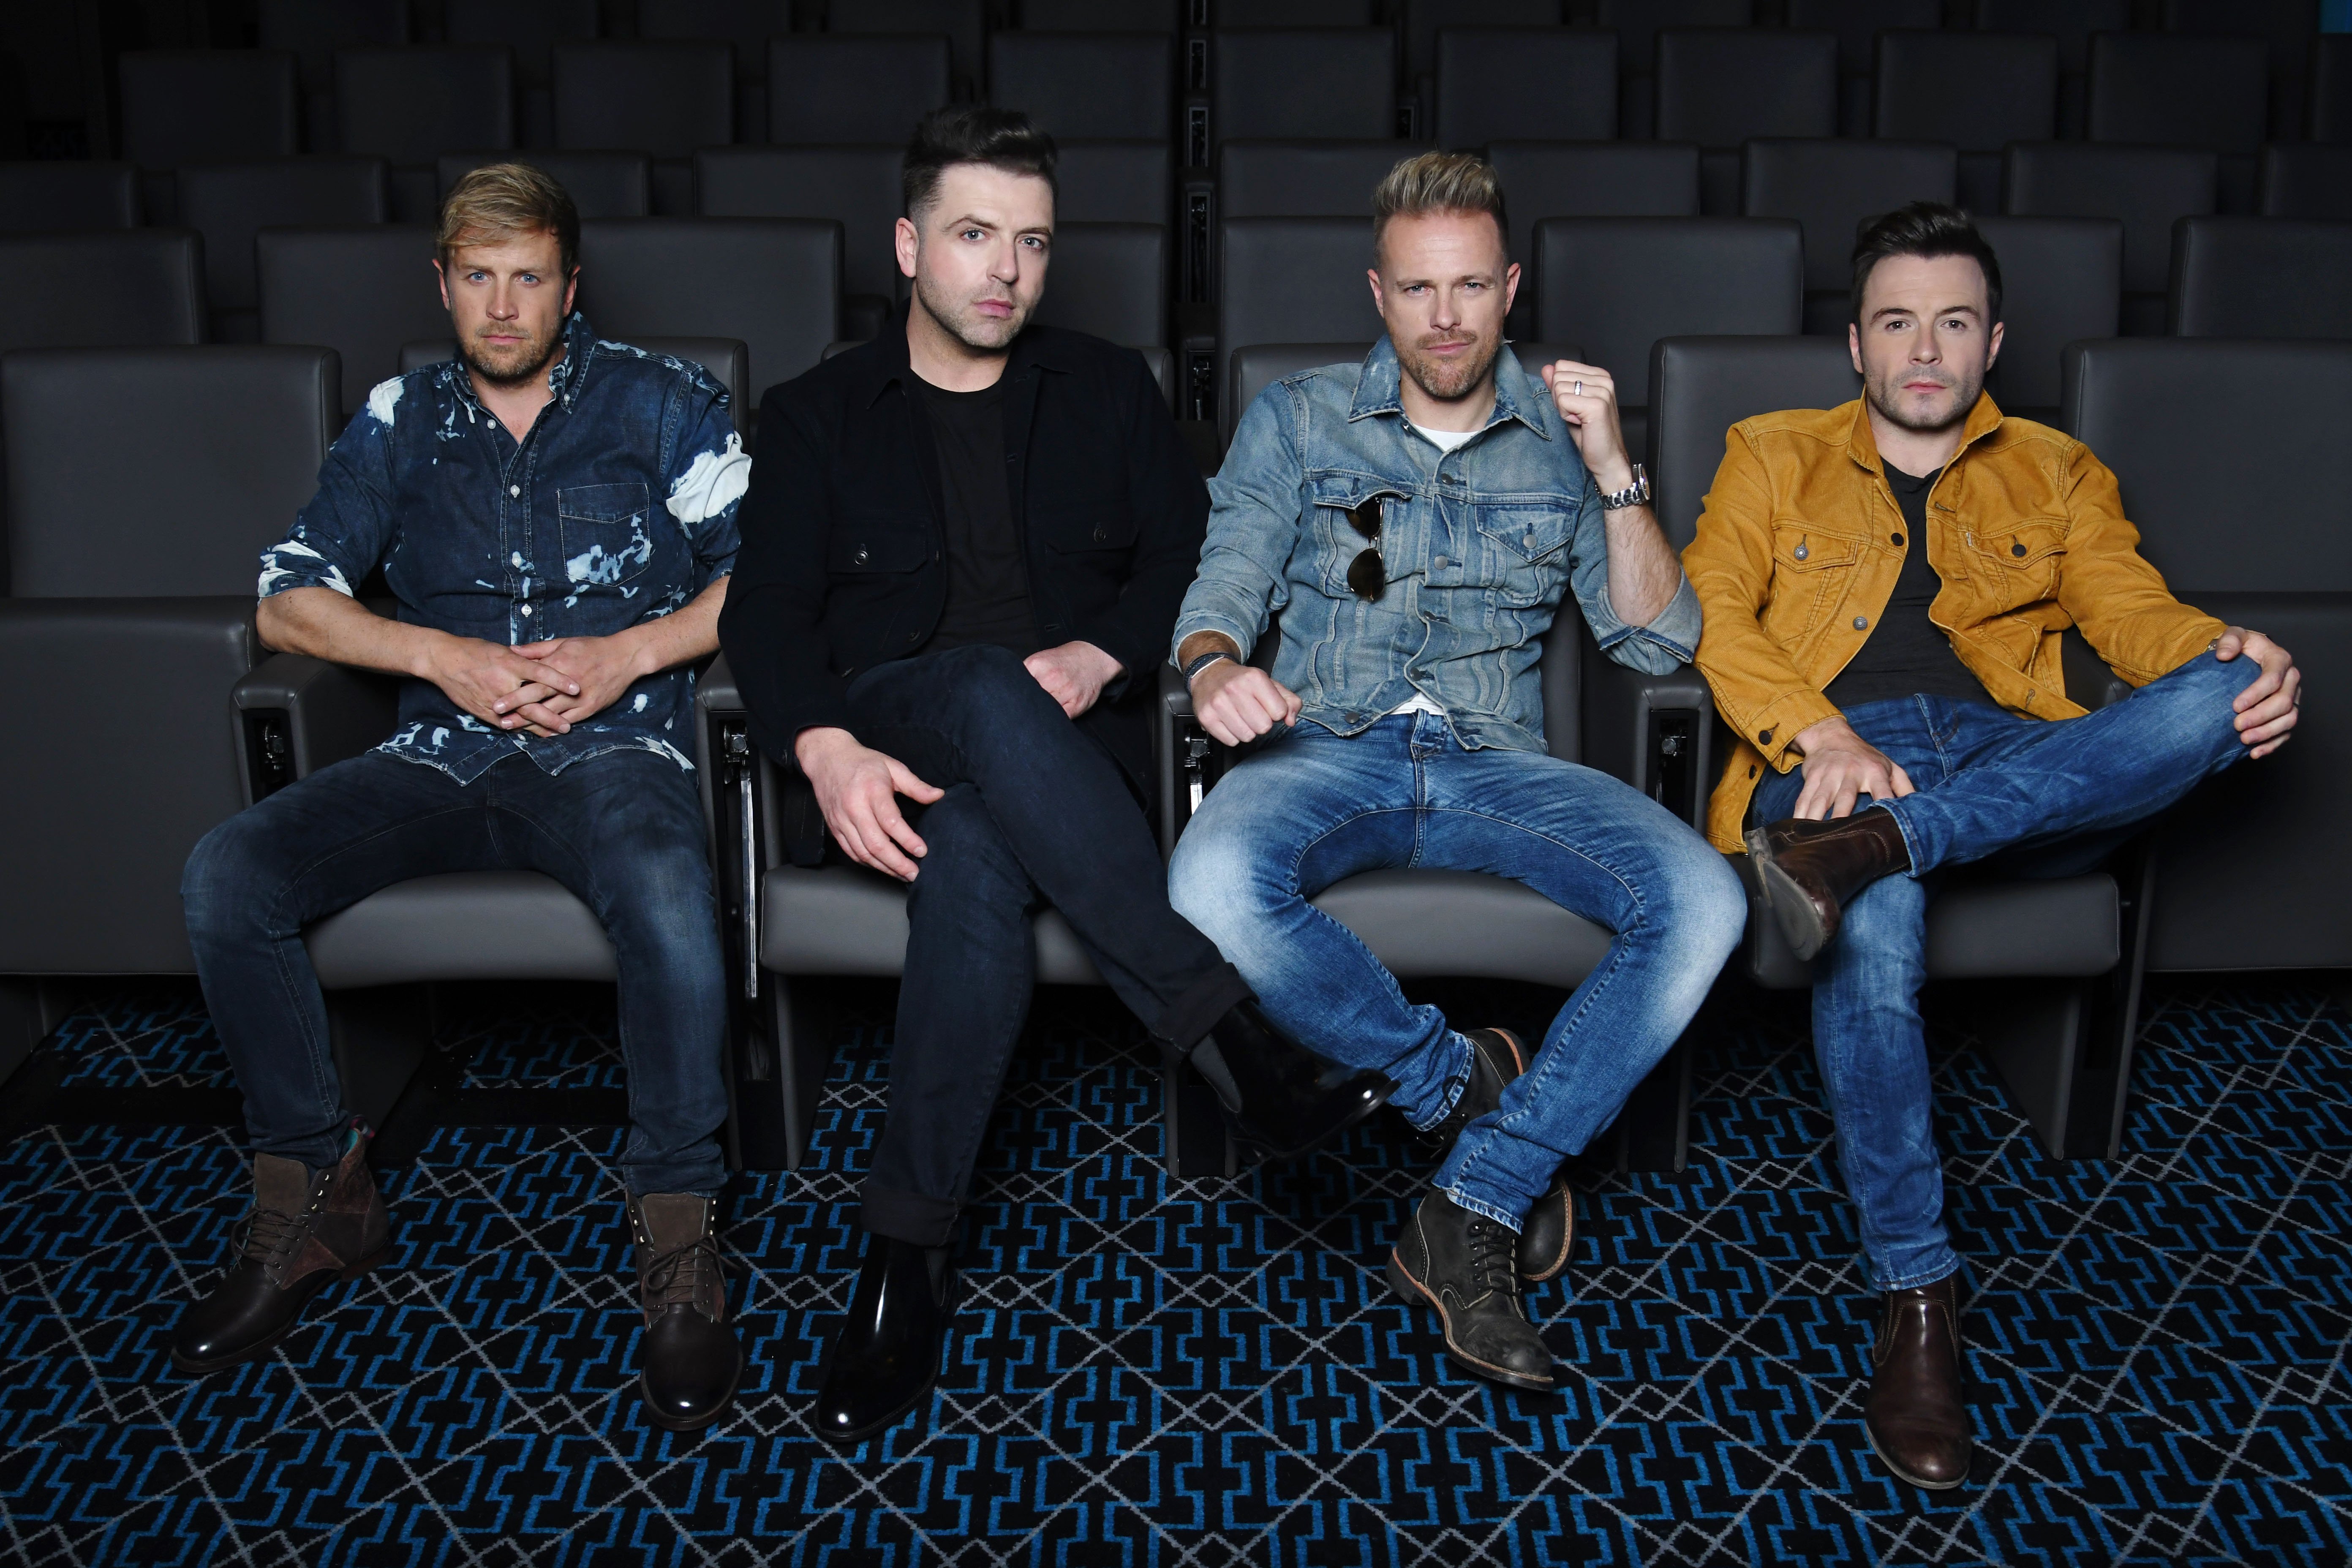 Westlife to re-form for new music and tour, Pop and rock